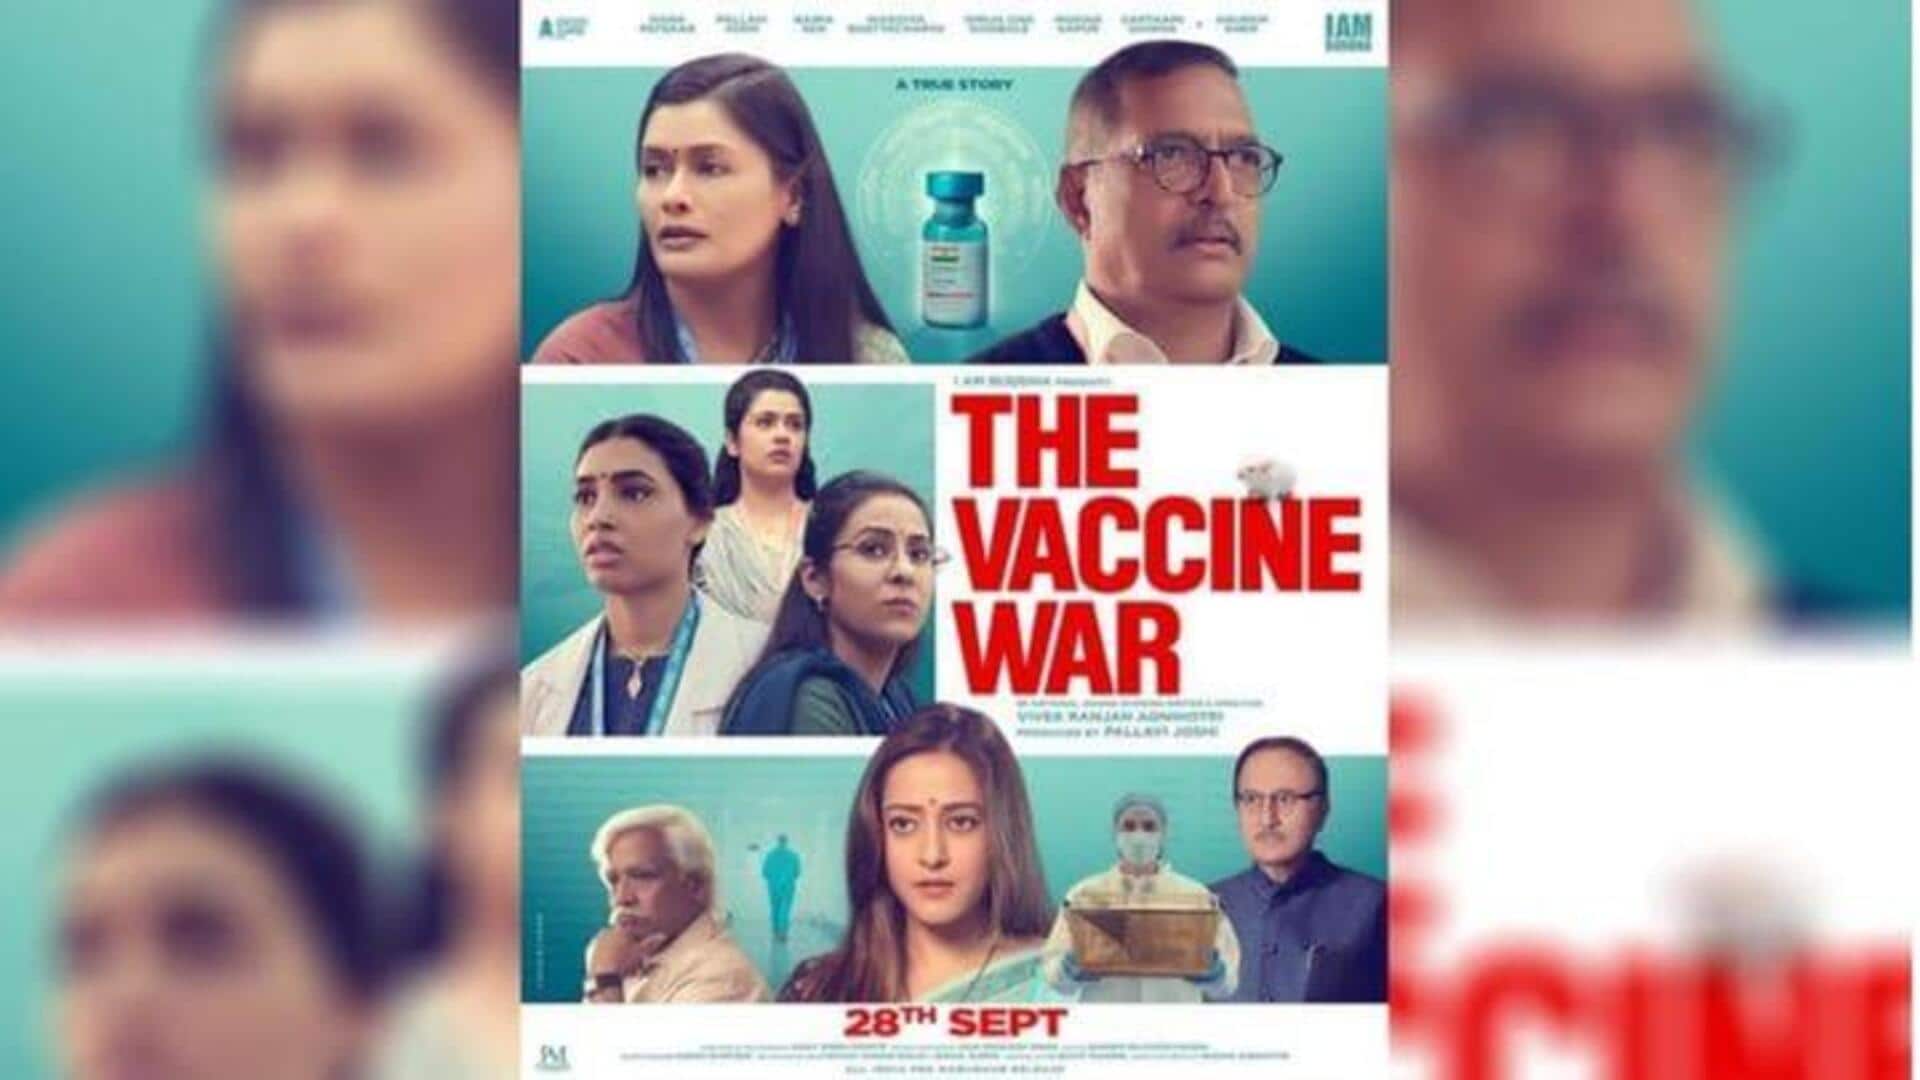 Box office: 'The Vaccine War' fails to cross Rs. 2cr